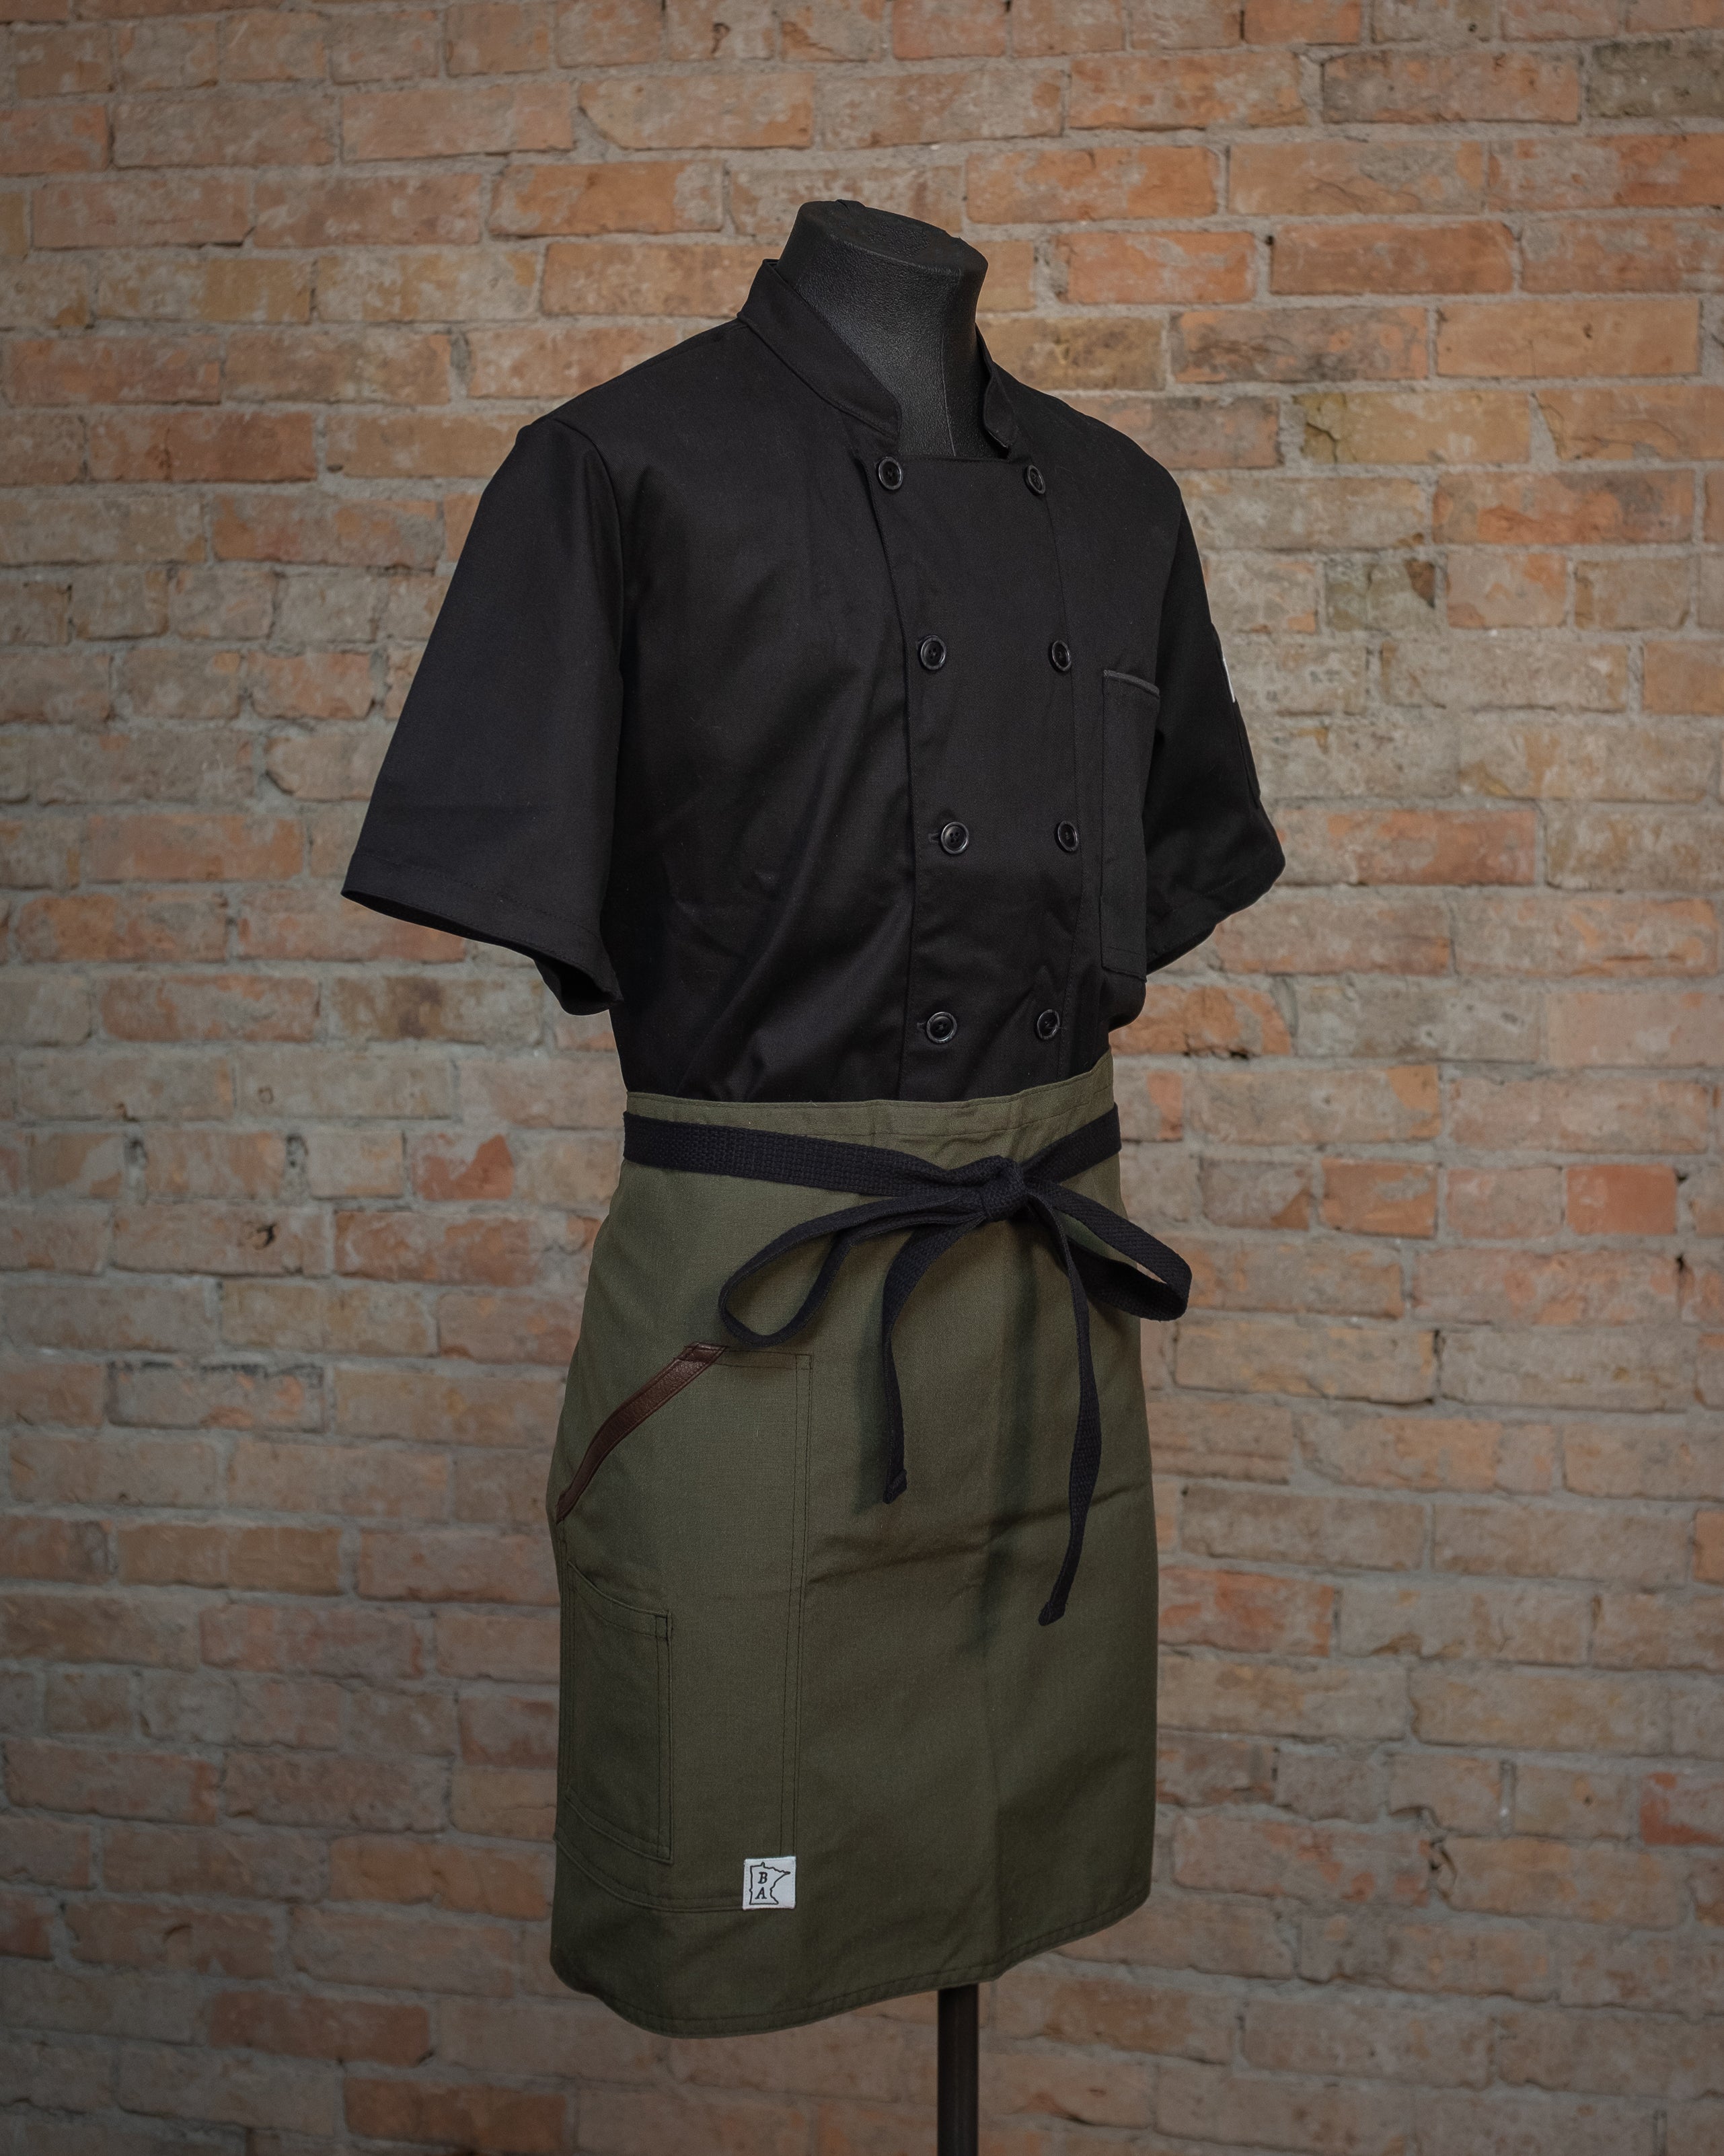 The Nomex-Kevlar apron design Fire Watch displayed on a mannequin's waist over a black chef coat. Both the chef coat and the apron were designed and produced by Craftmade Aprons, Minnesota. 